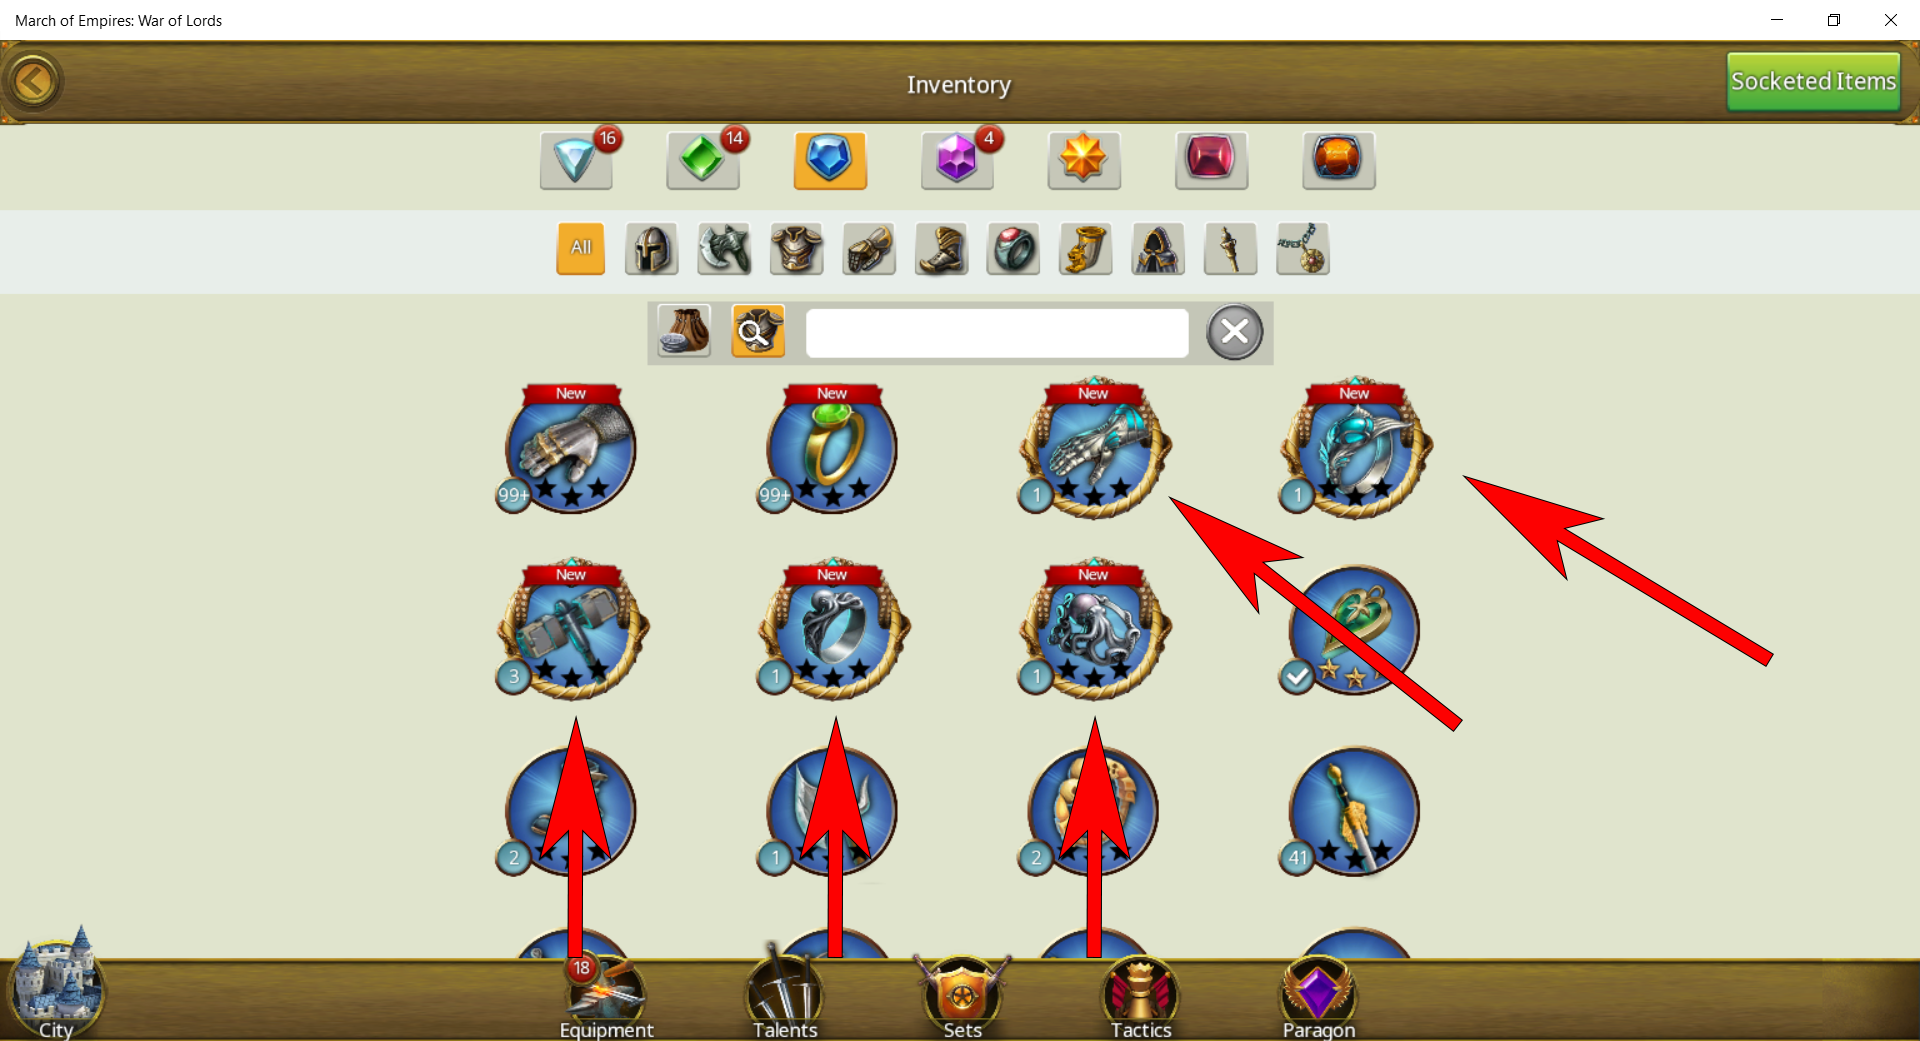 Atlantis gifts – 6 great new items-1 is double – March Of Empires – War Of Lords